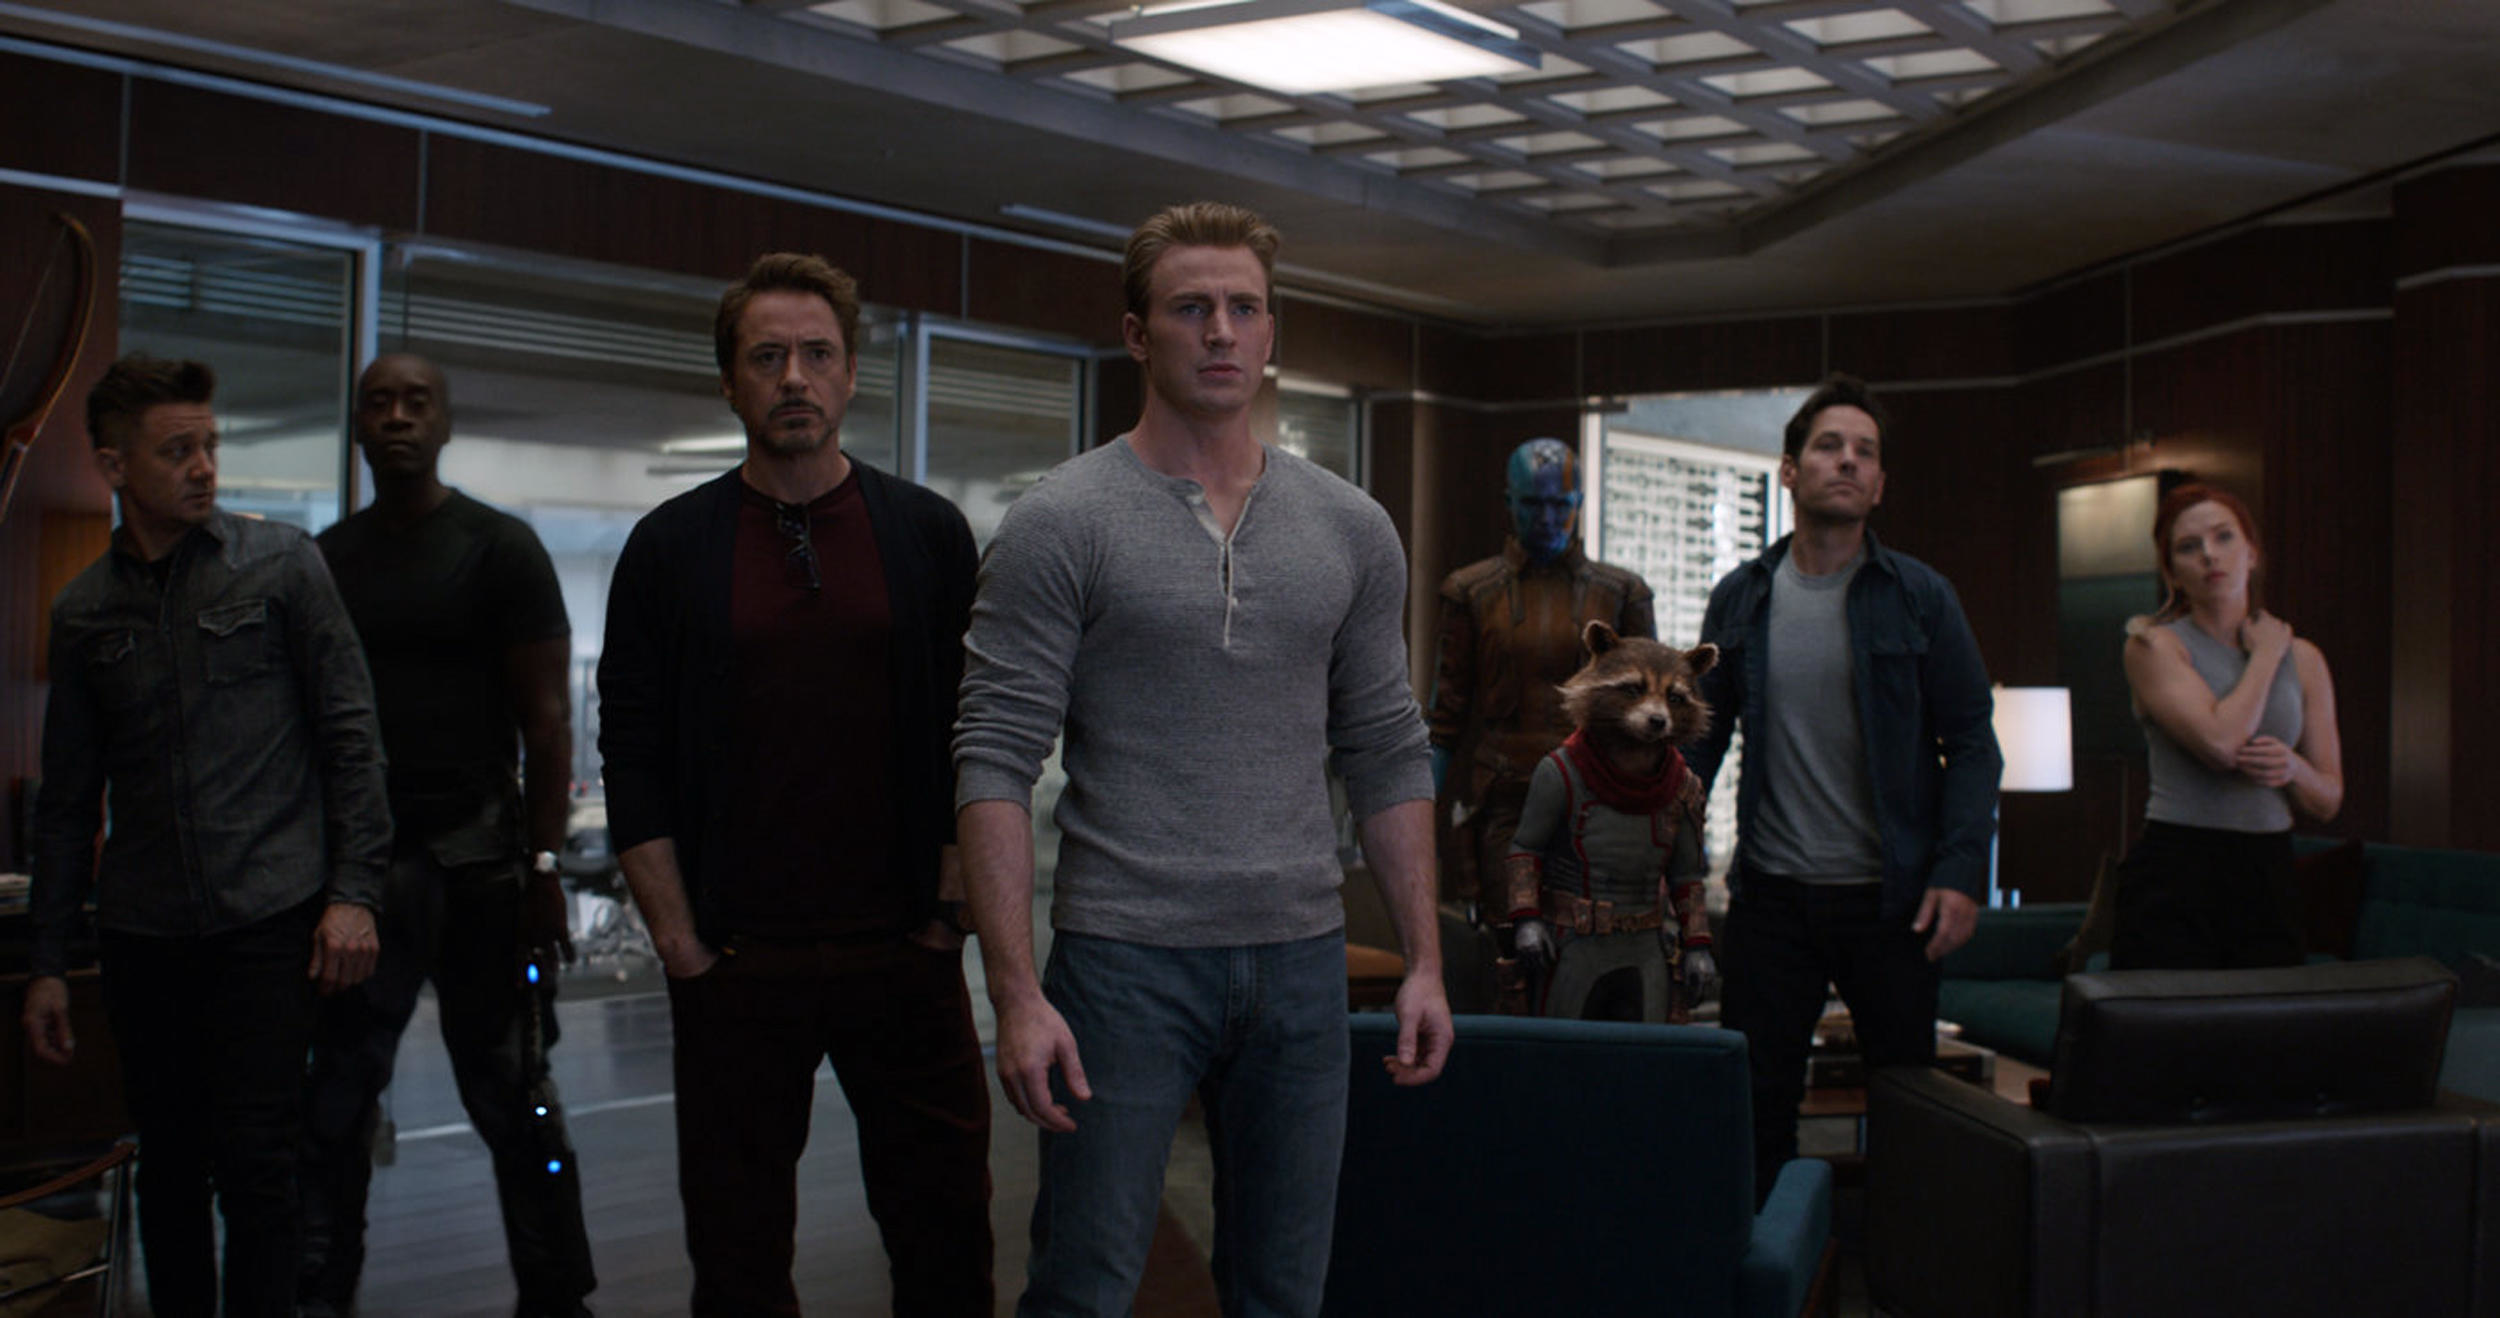 The cast of Avengers: Endgame assemble in a posh war room